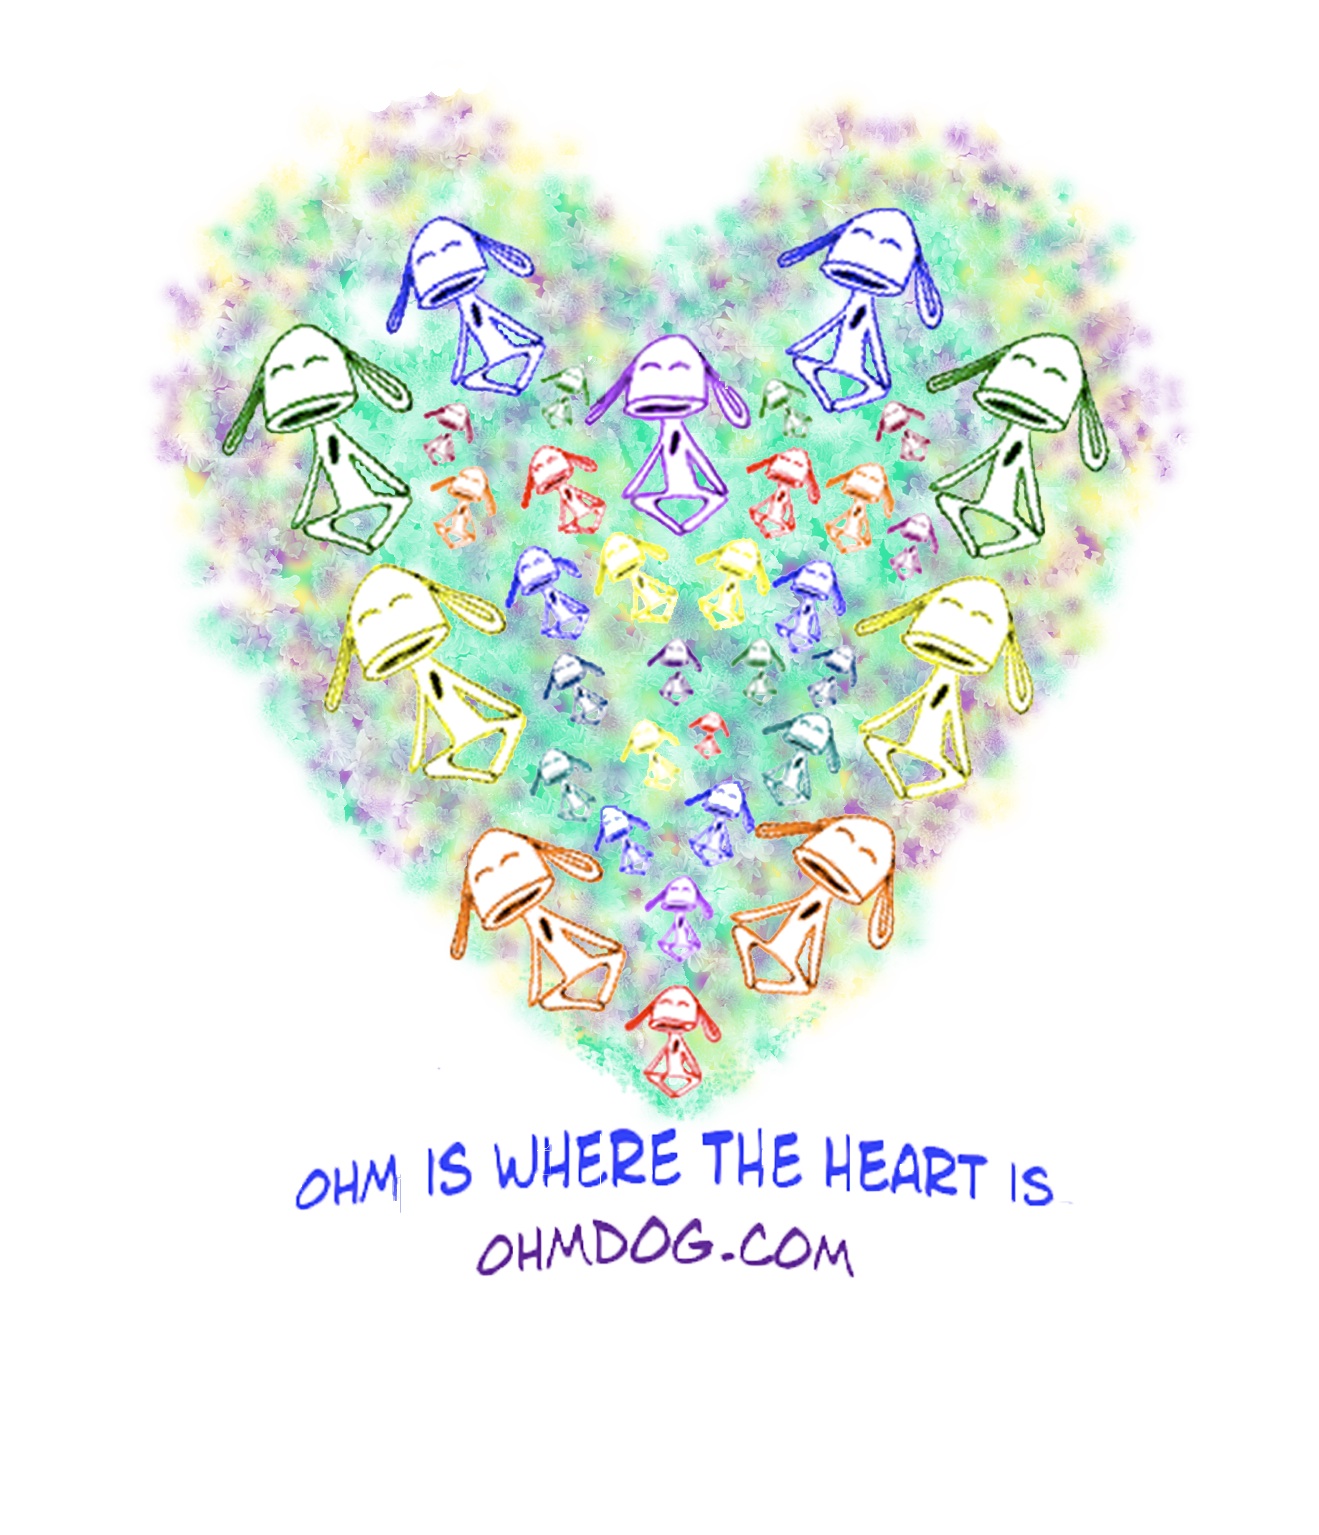 Ohm is where the heart is design